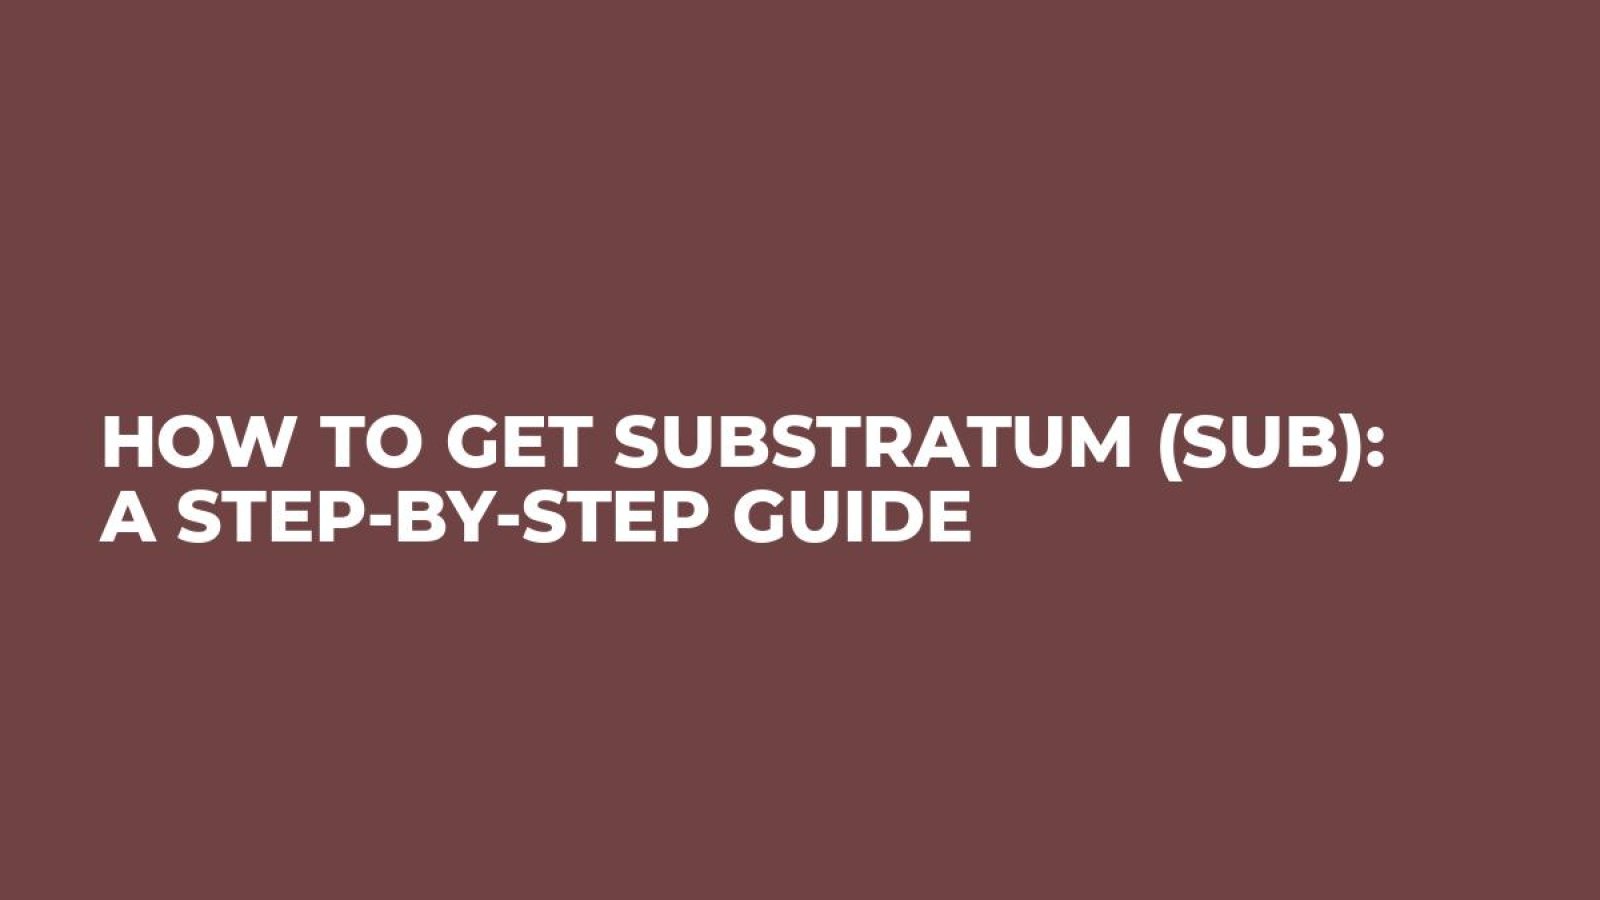 How to Get Substratum (SUB): A Step-by-Step Guide